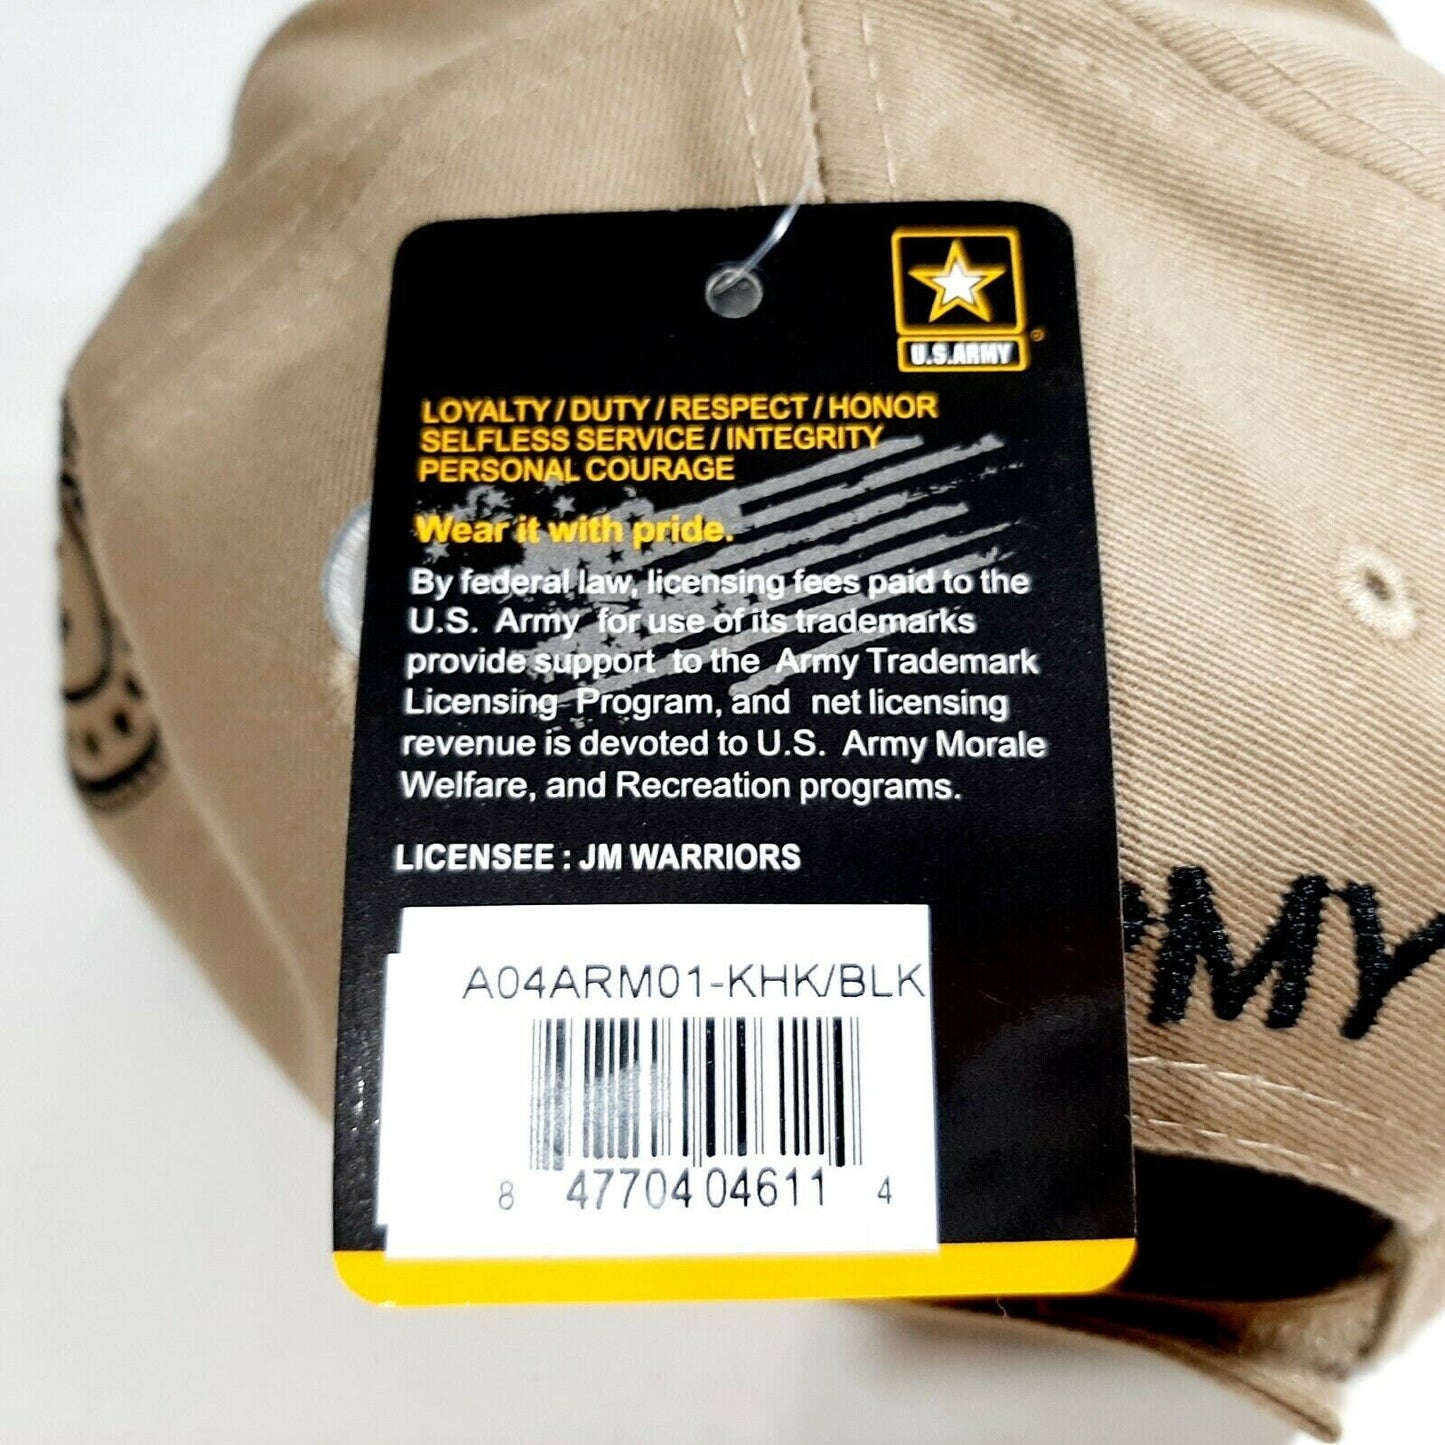 US Army Mens Officially Licensed Hat Ball Cap Adjustable Embroidered New